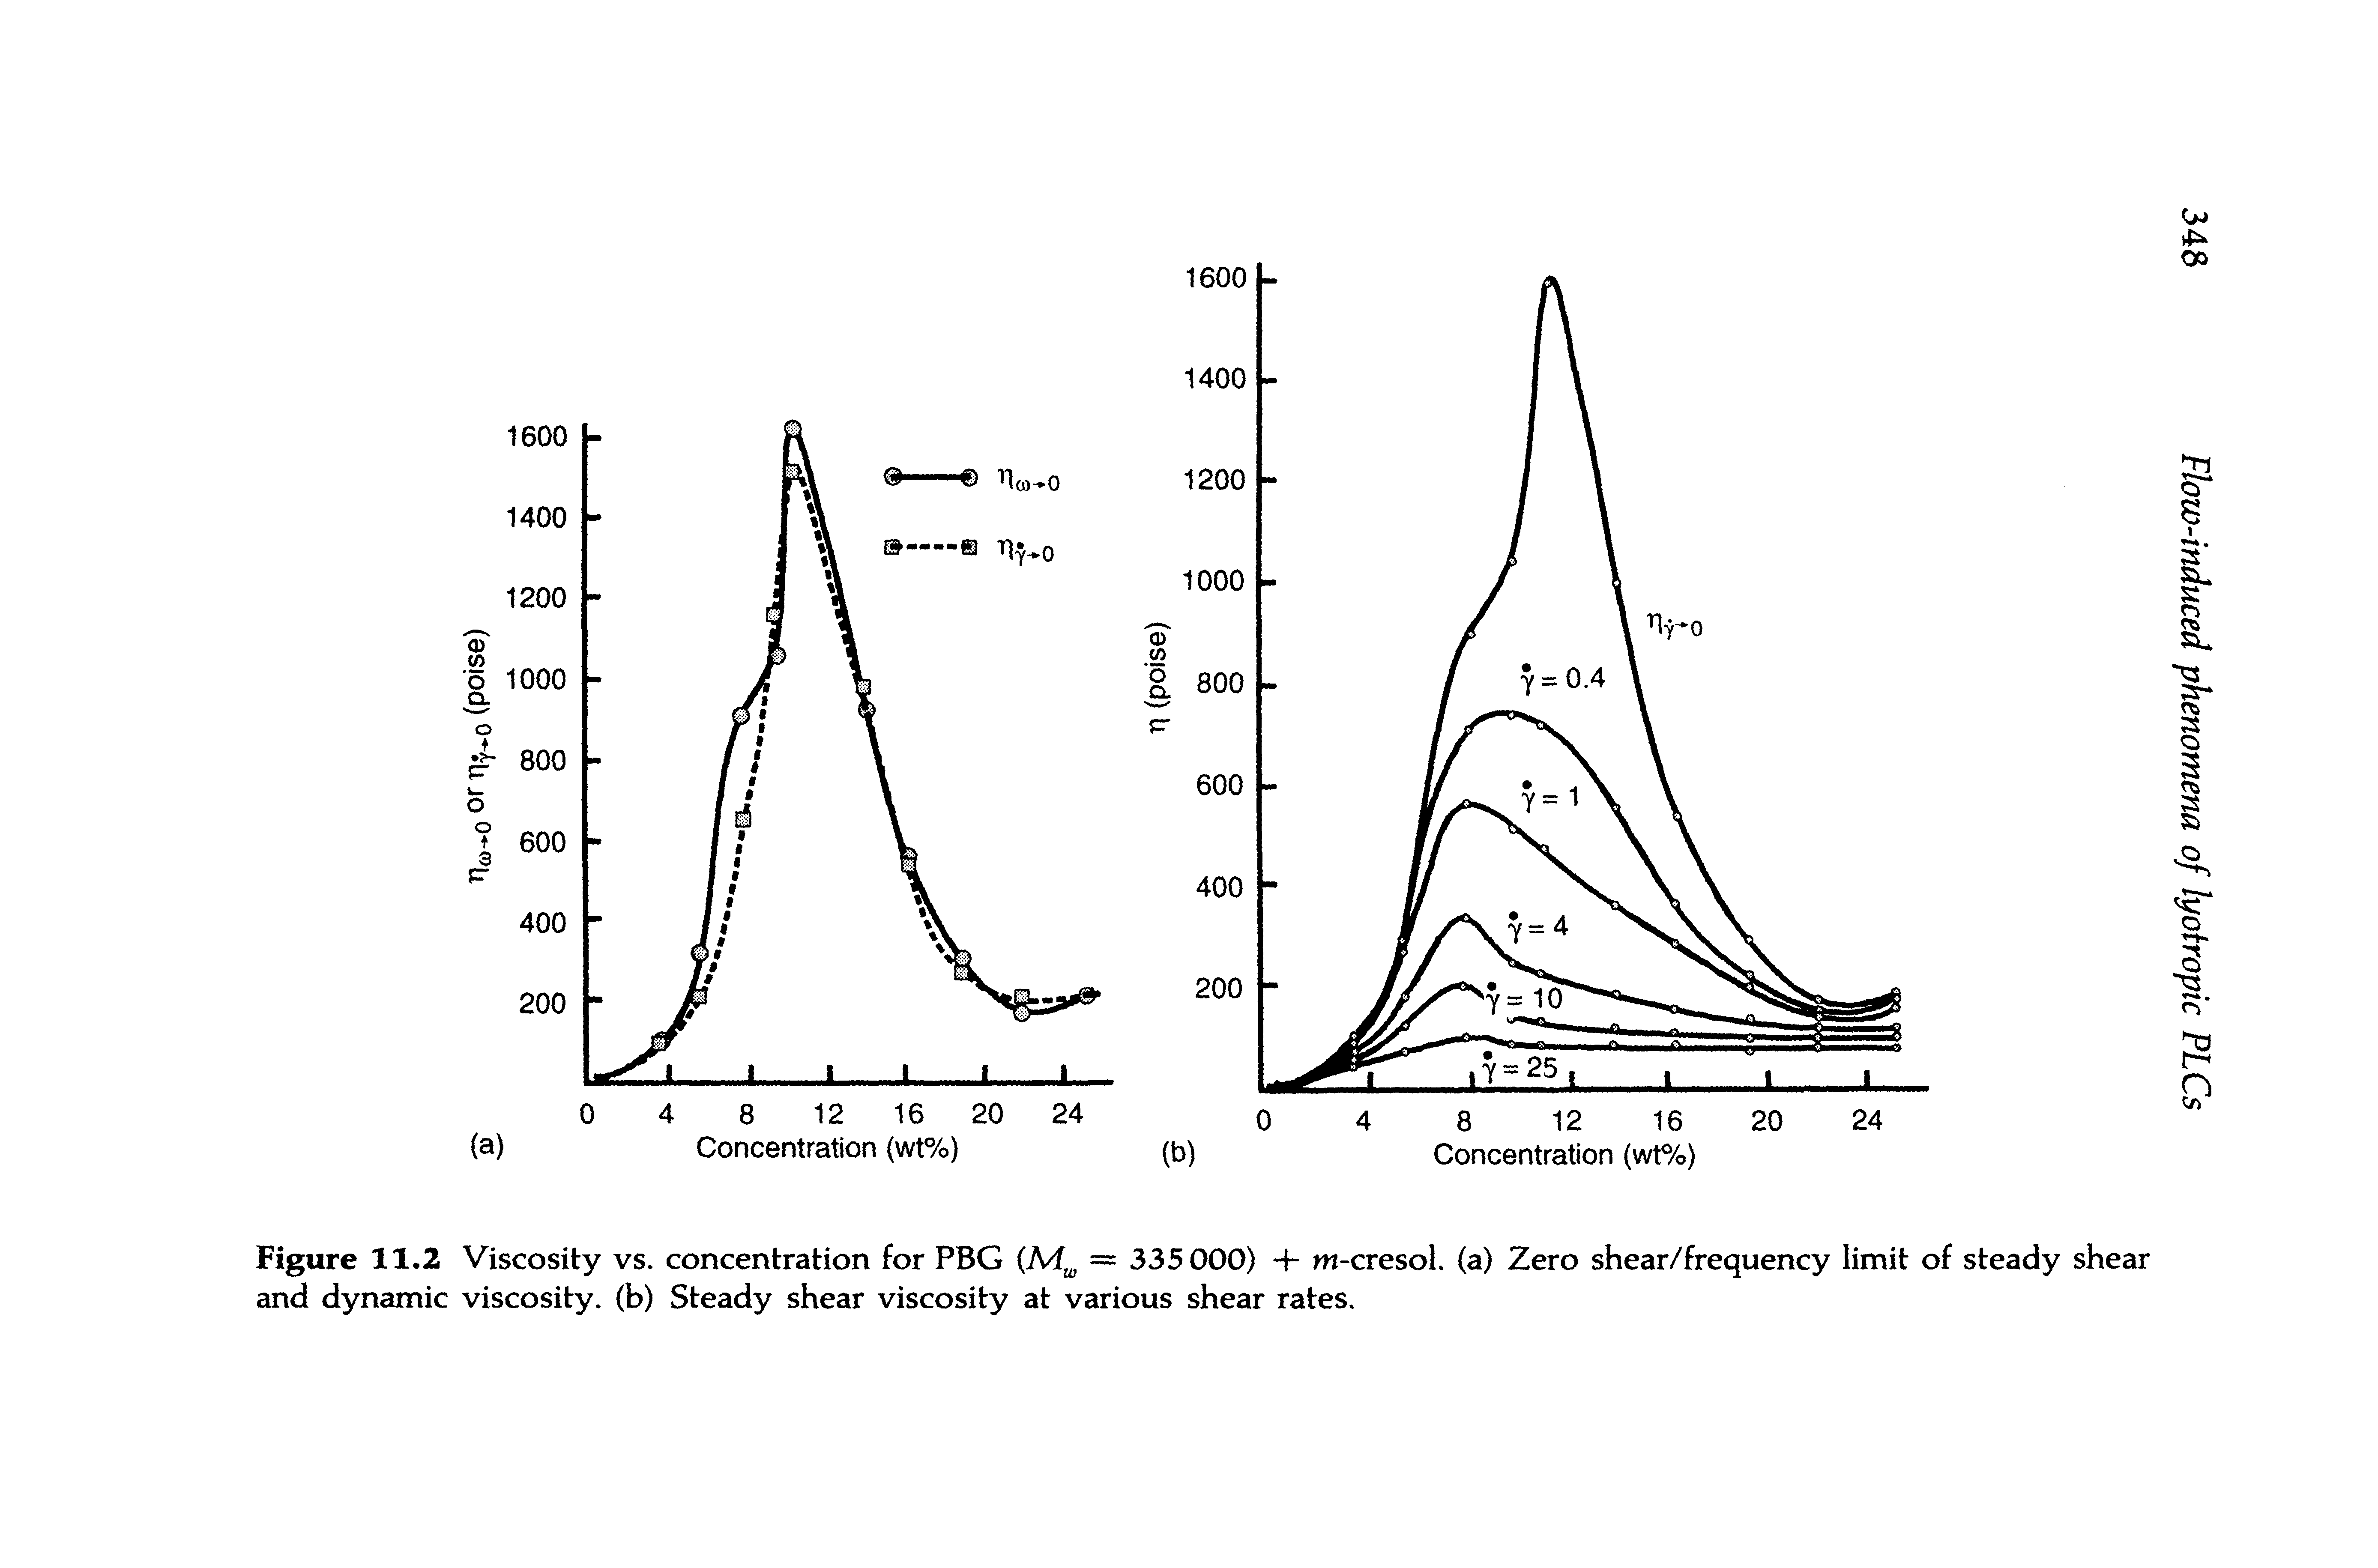 Figure 11.2 Viscosity vs. concentration for PBG M = 335 000) 4- m-cresol. (a) Zero shear/frequency limit of steady shear and dynamic viscosity, (b) Steady shear viscosity at various shear rates.